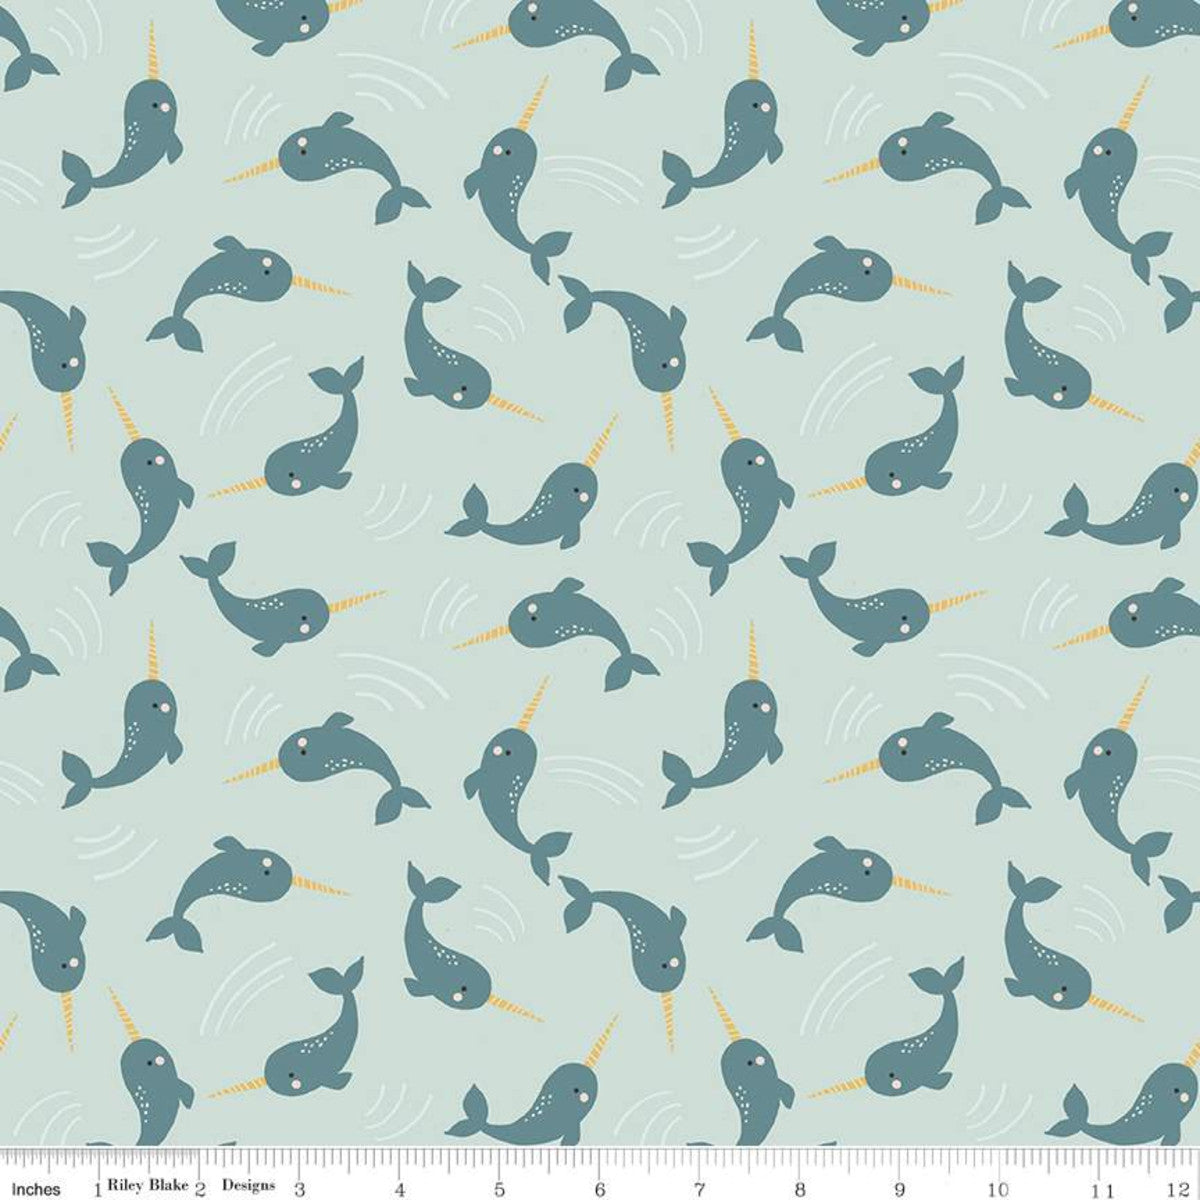 More Narwhals! Mint background with gold-colored horns (not metallic). 